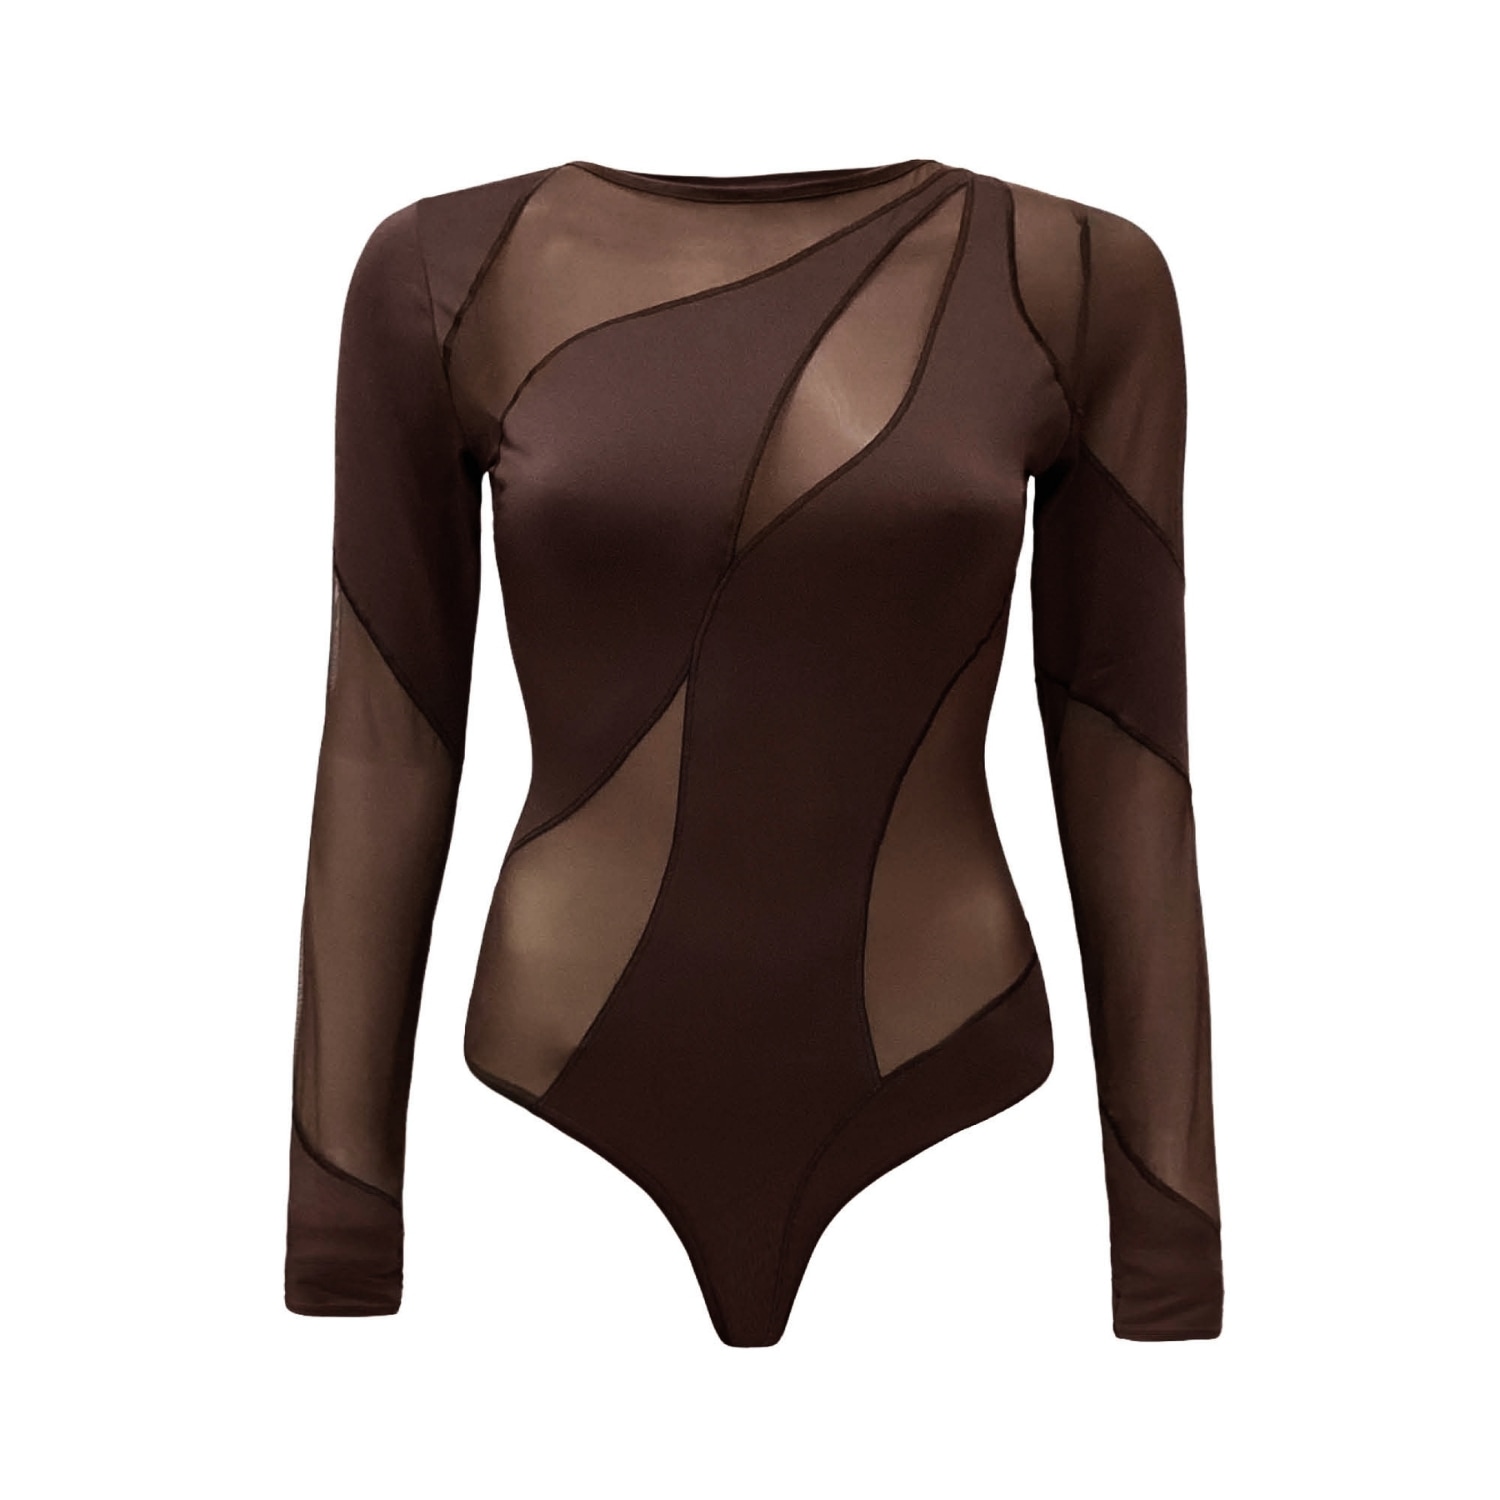 Ow Collection Women's Brown Spiral Long Sleeve Bodysuit